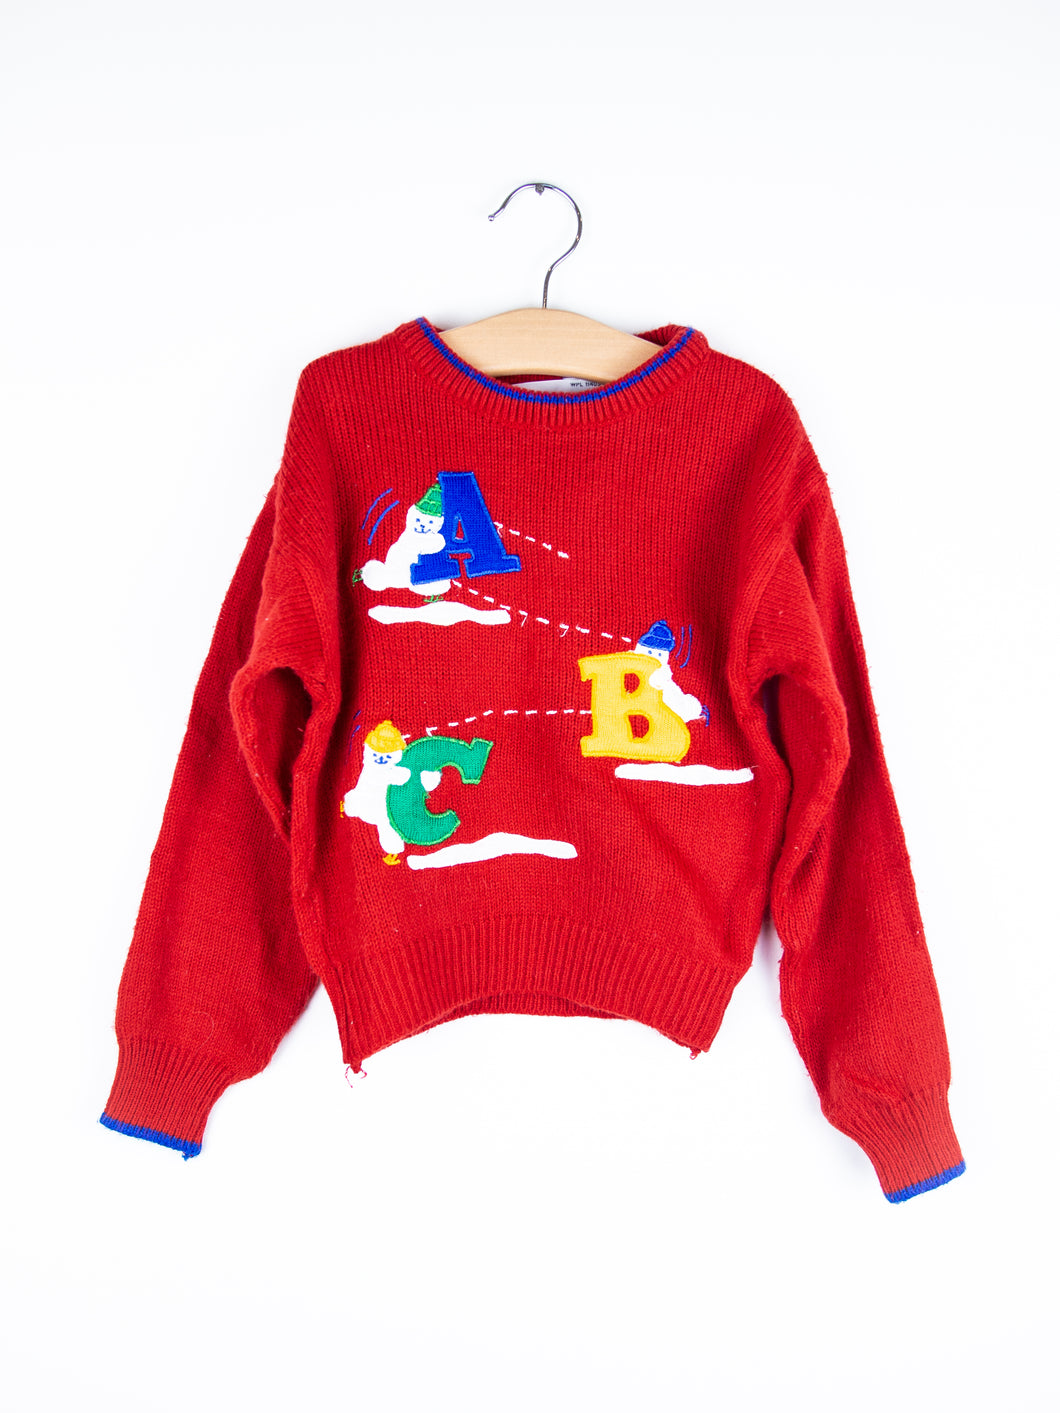 Vintage ABC Knit Jumper - Age 3 years